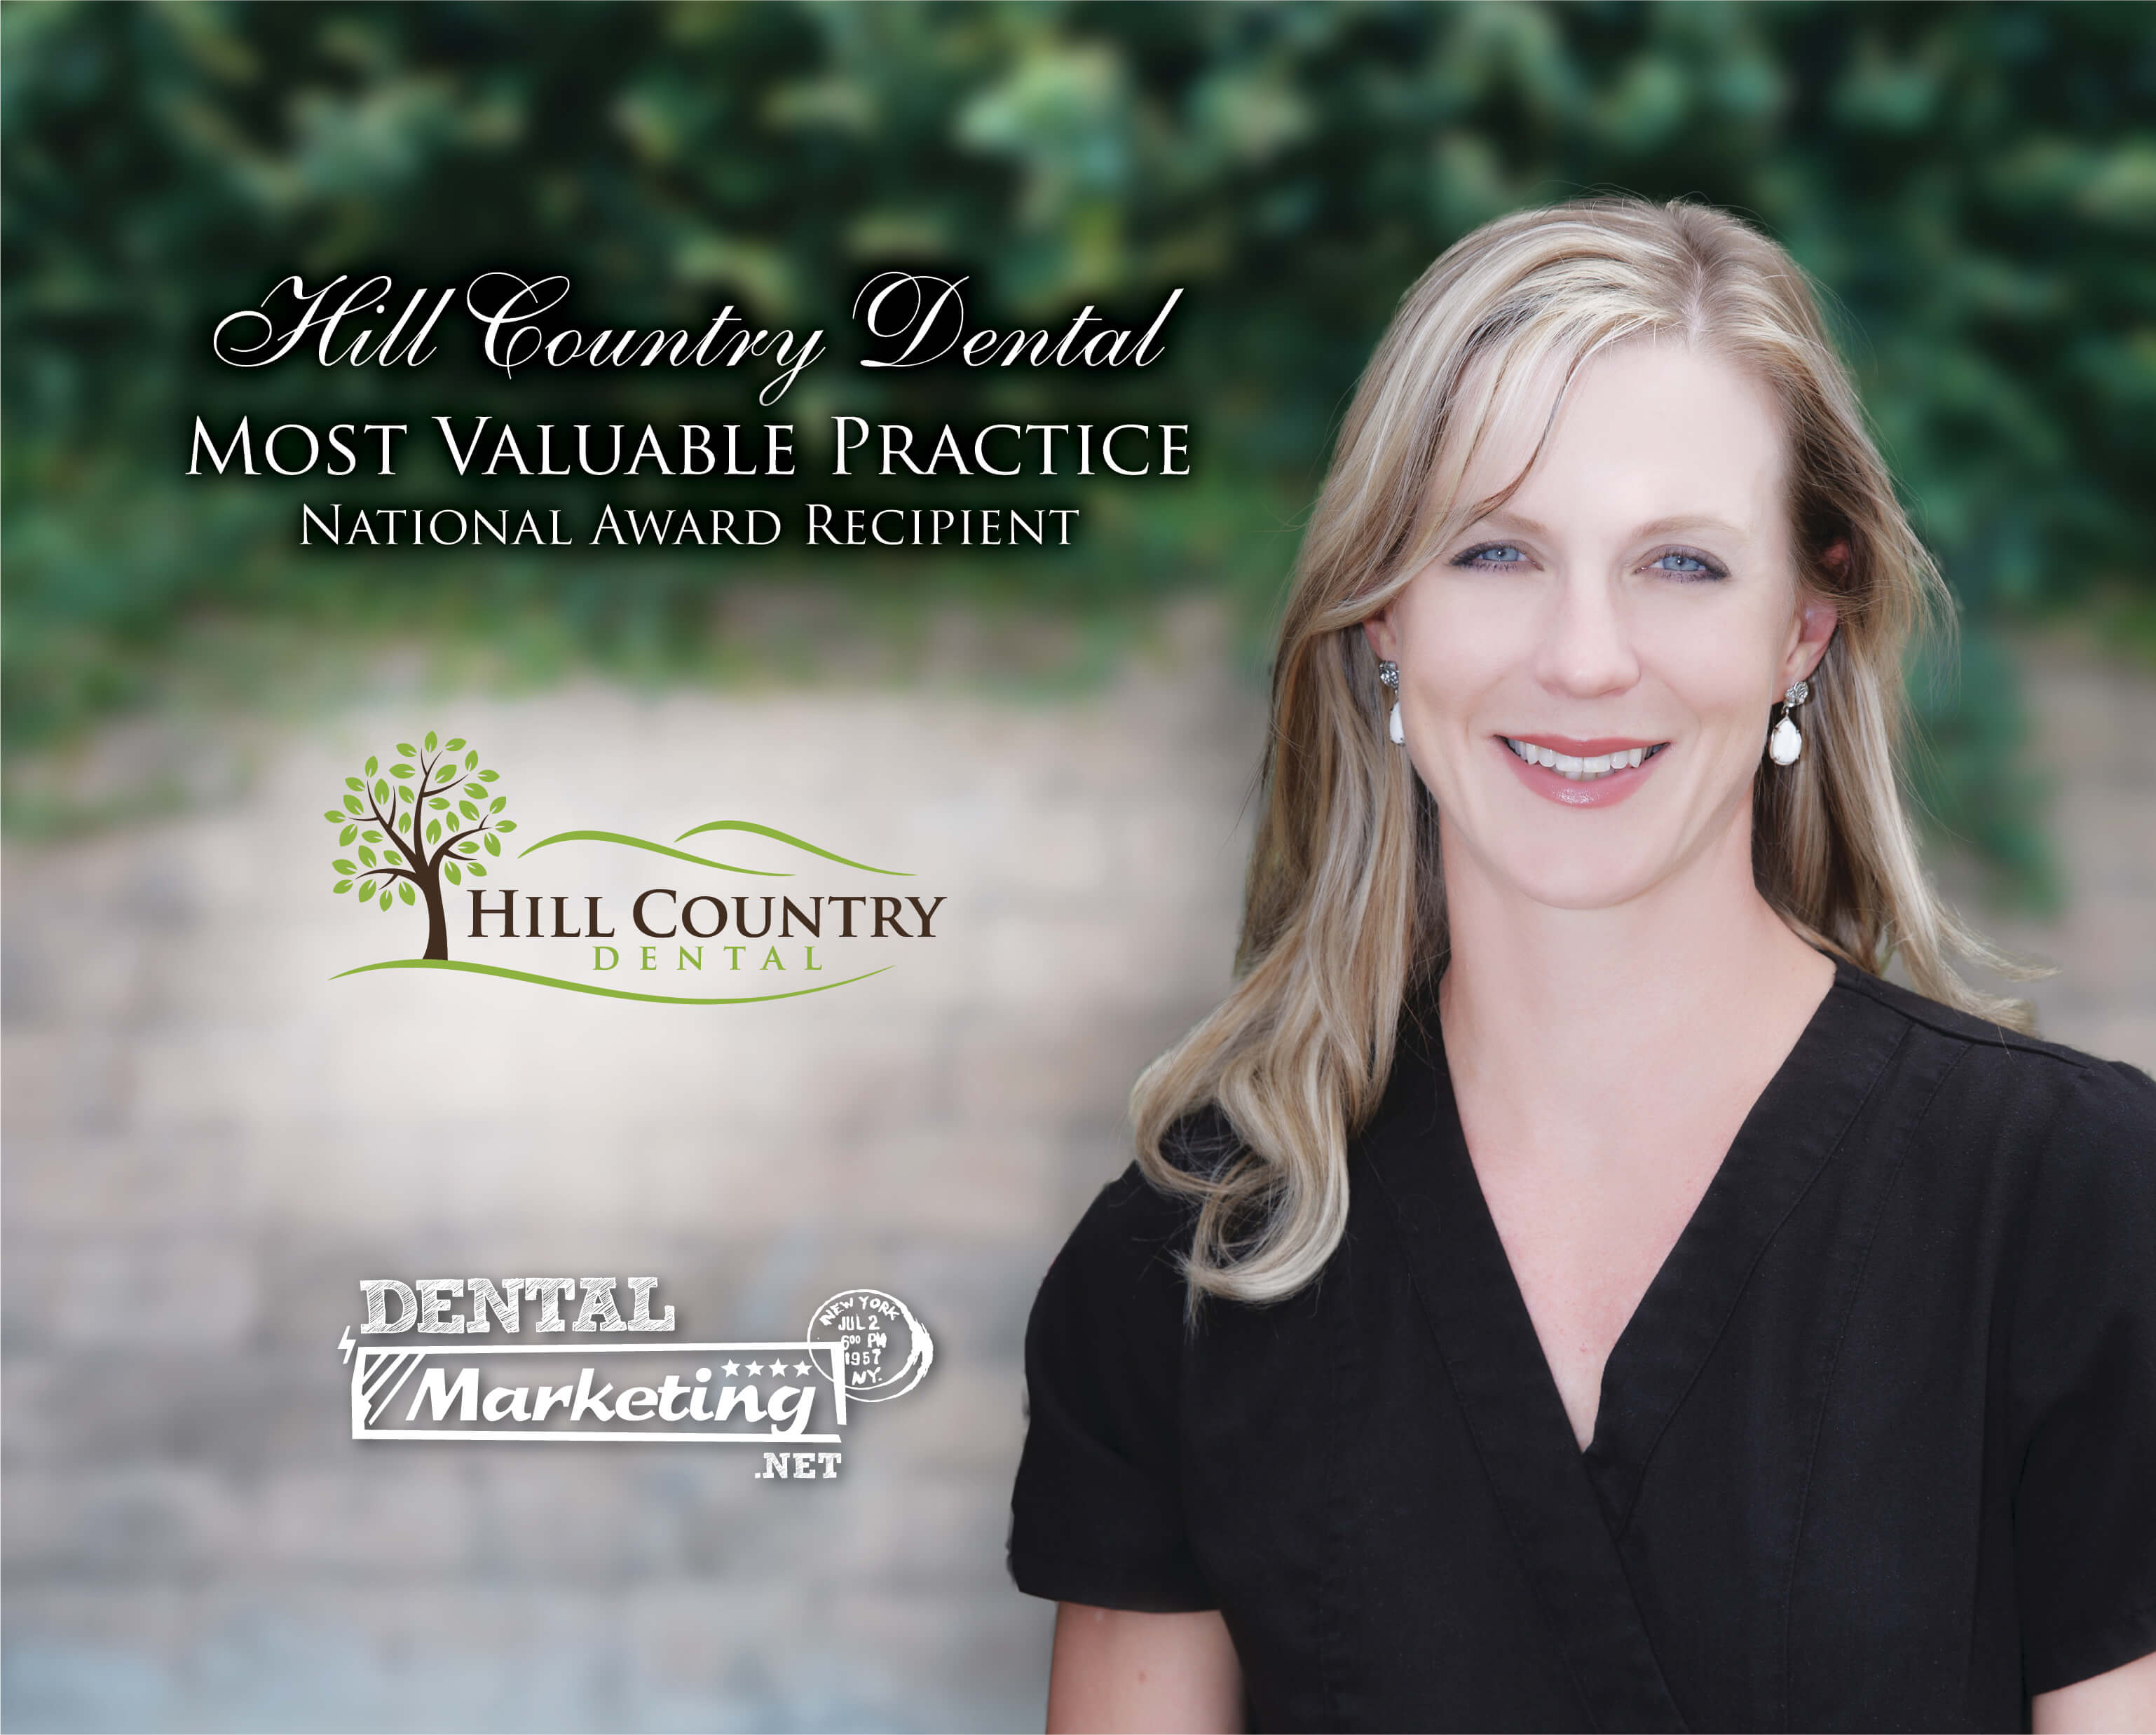 Dental Marketing's Most Valuable Practice Hill Country Dental